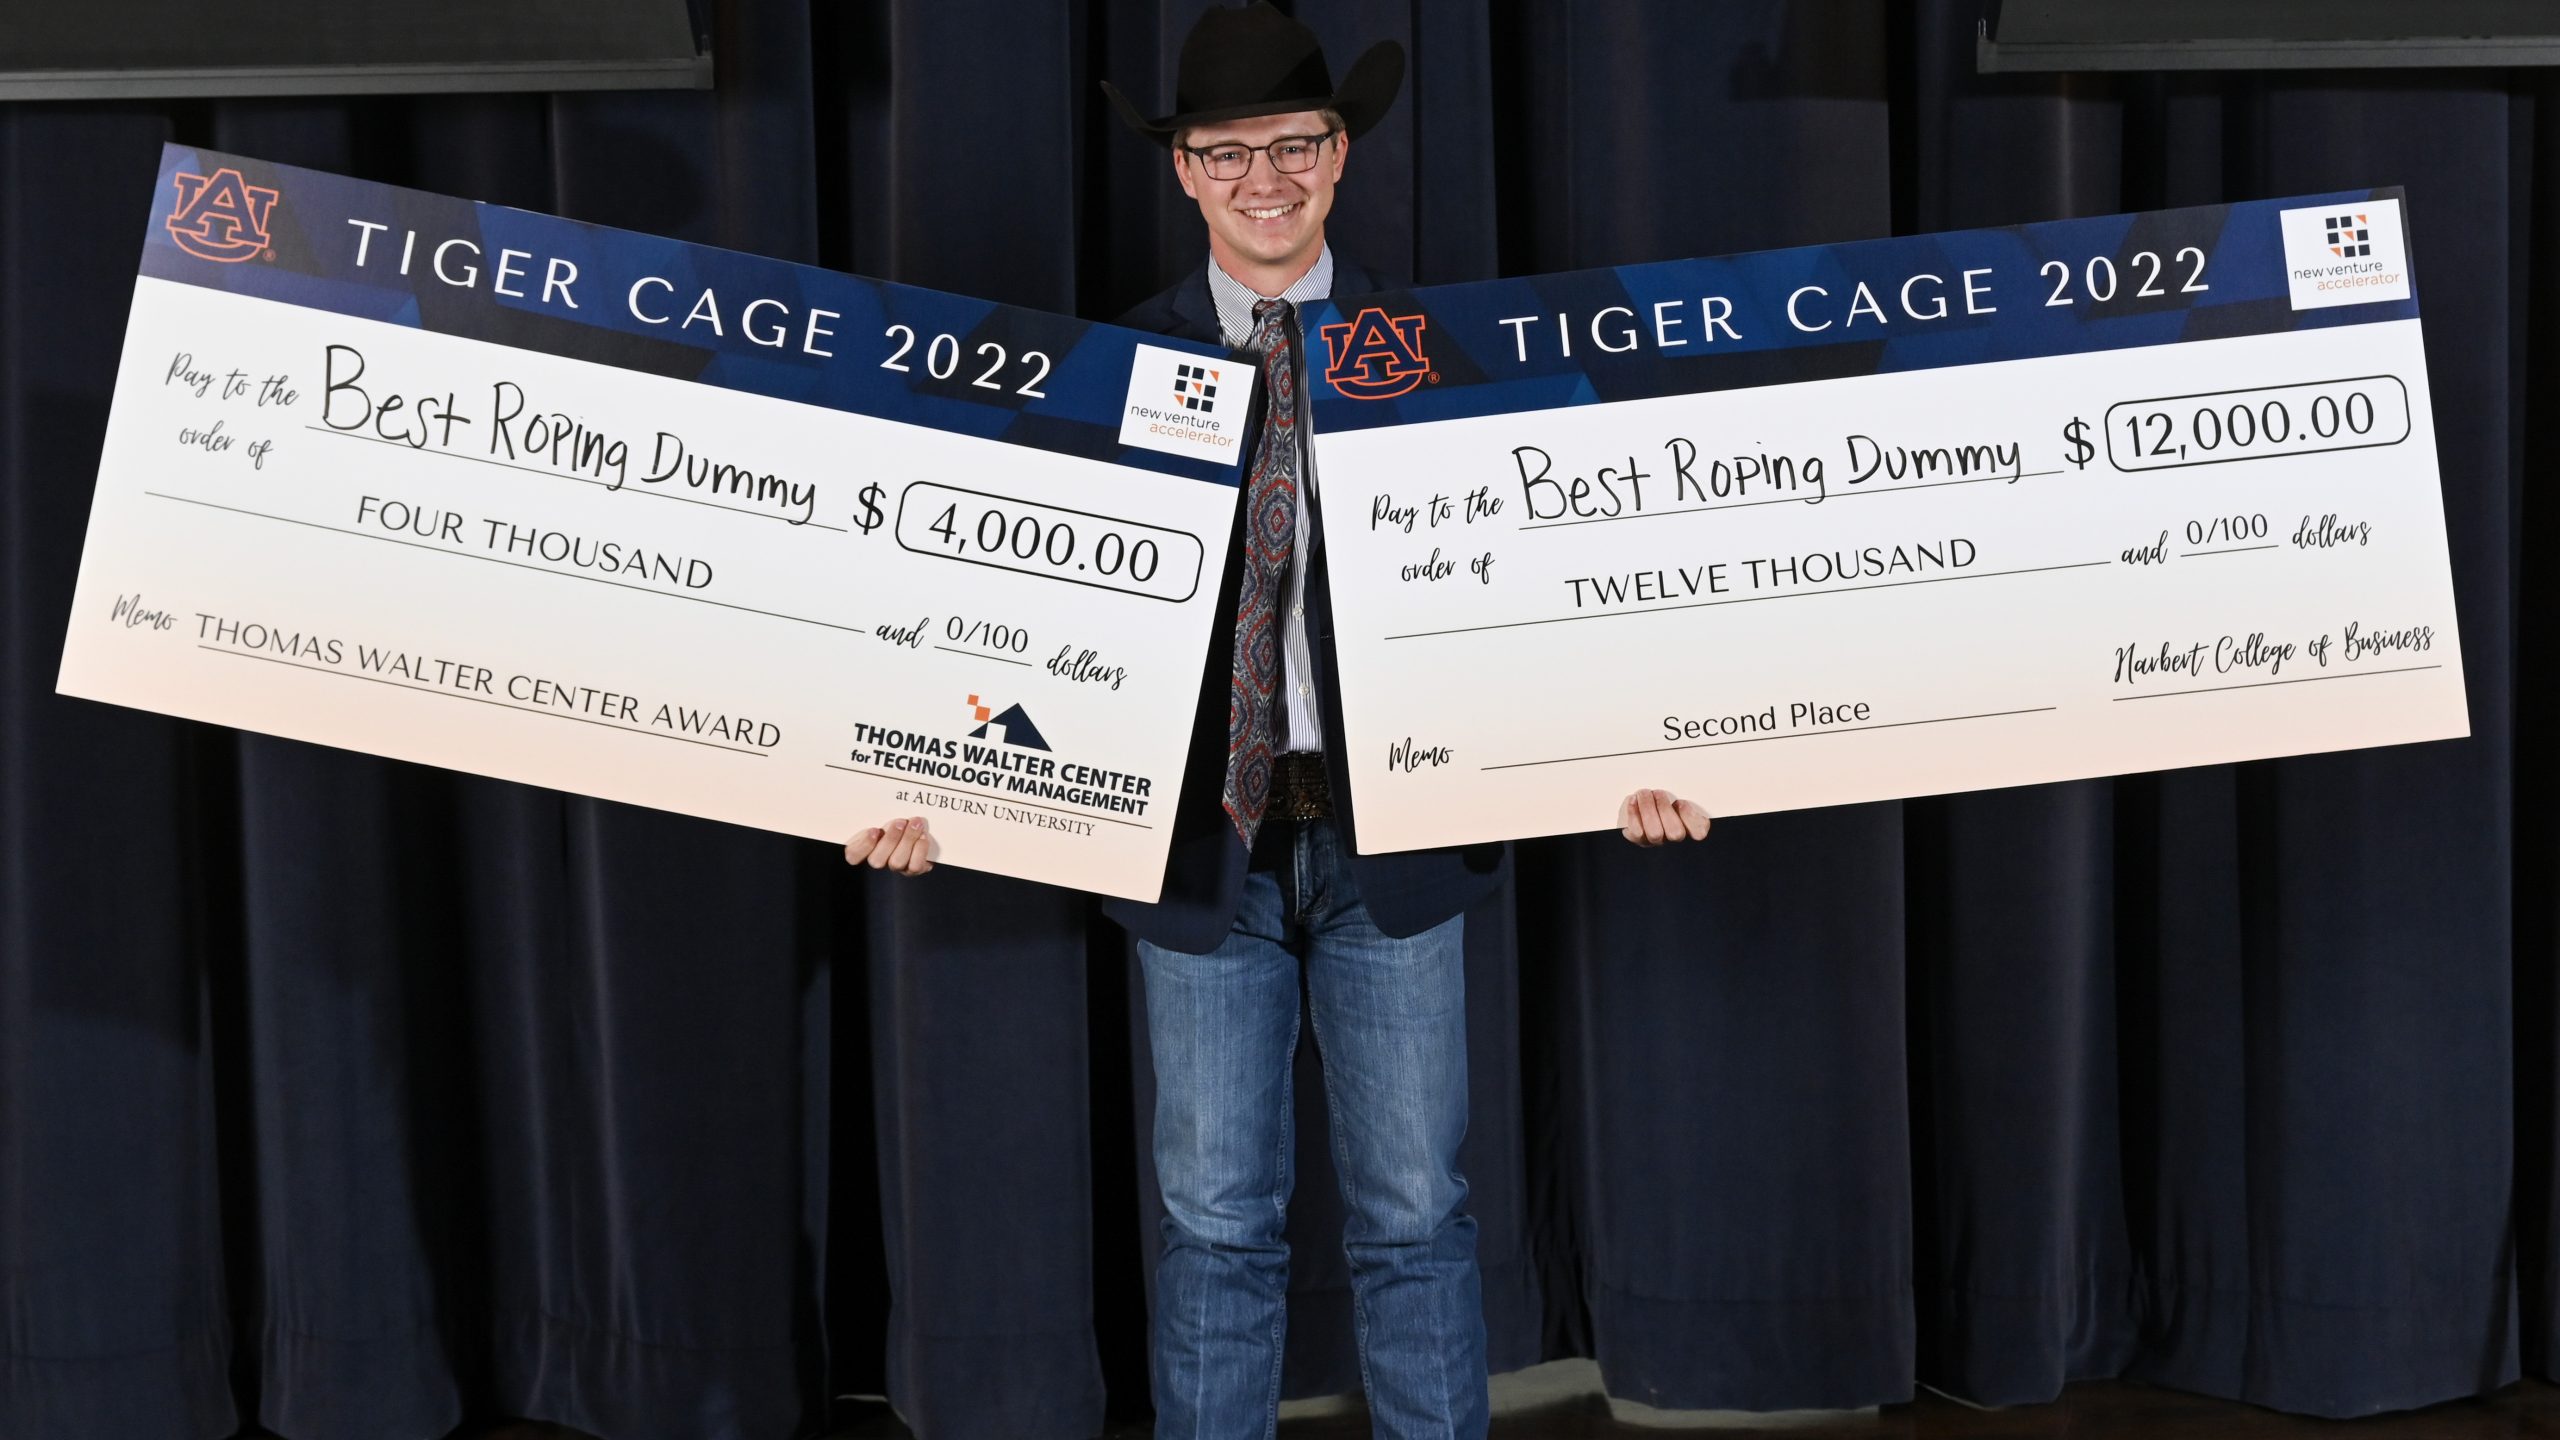 Will Jordan of The Best Roping Dummy takes second place during the Tiger Cage finals at the Harbert College of Business Friday, March 25, 2022, in Auburn, Ala. (Photo by Julie Bennett)